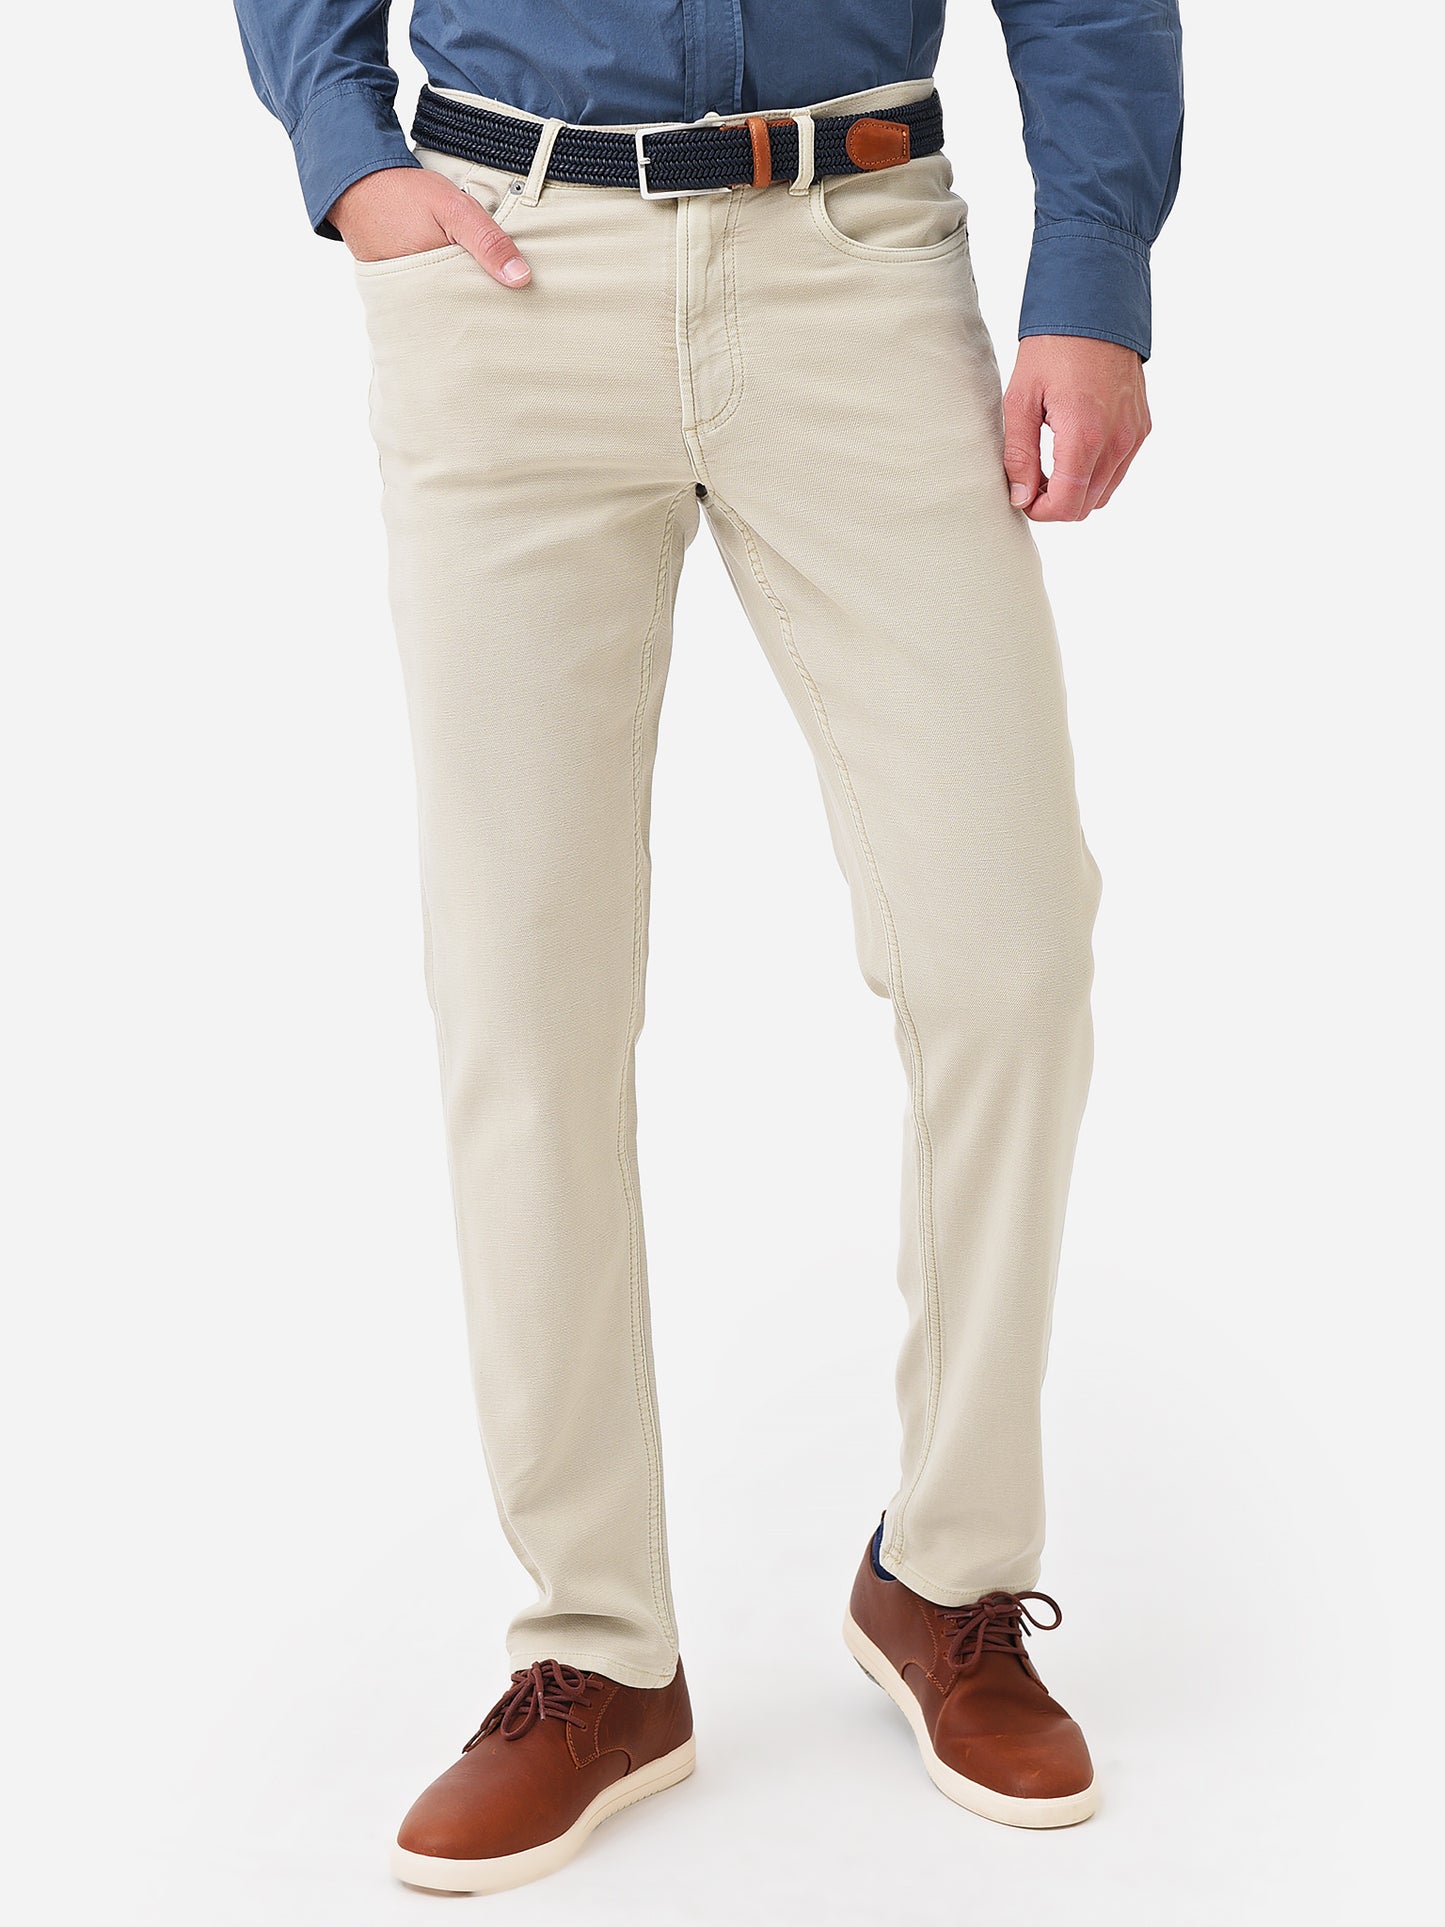 Faherty Brand Men's Stretch Terry 5-Pocket Pant